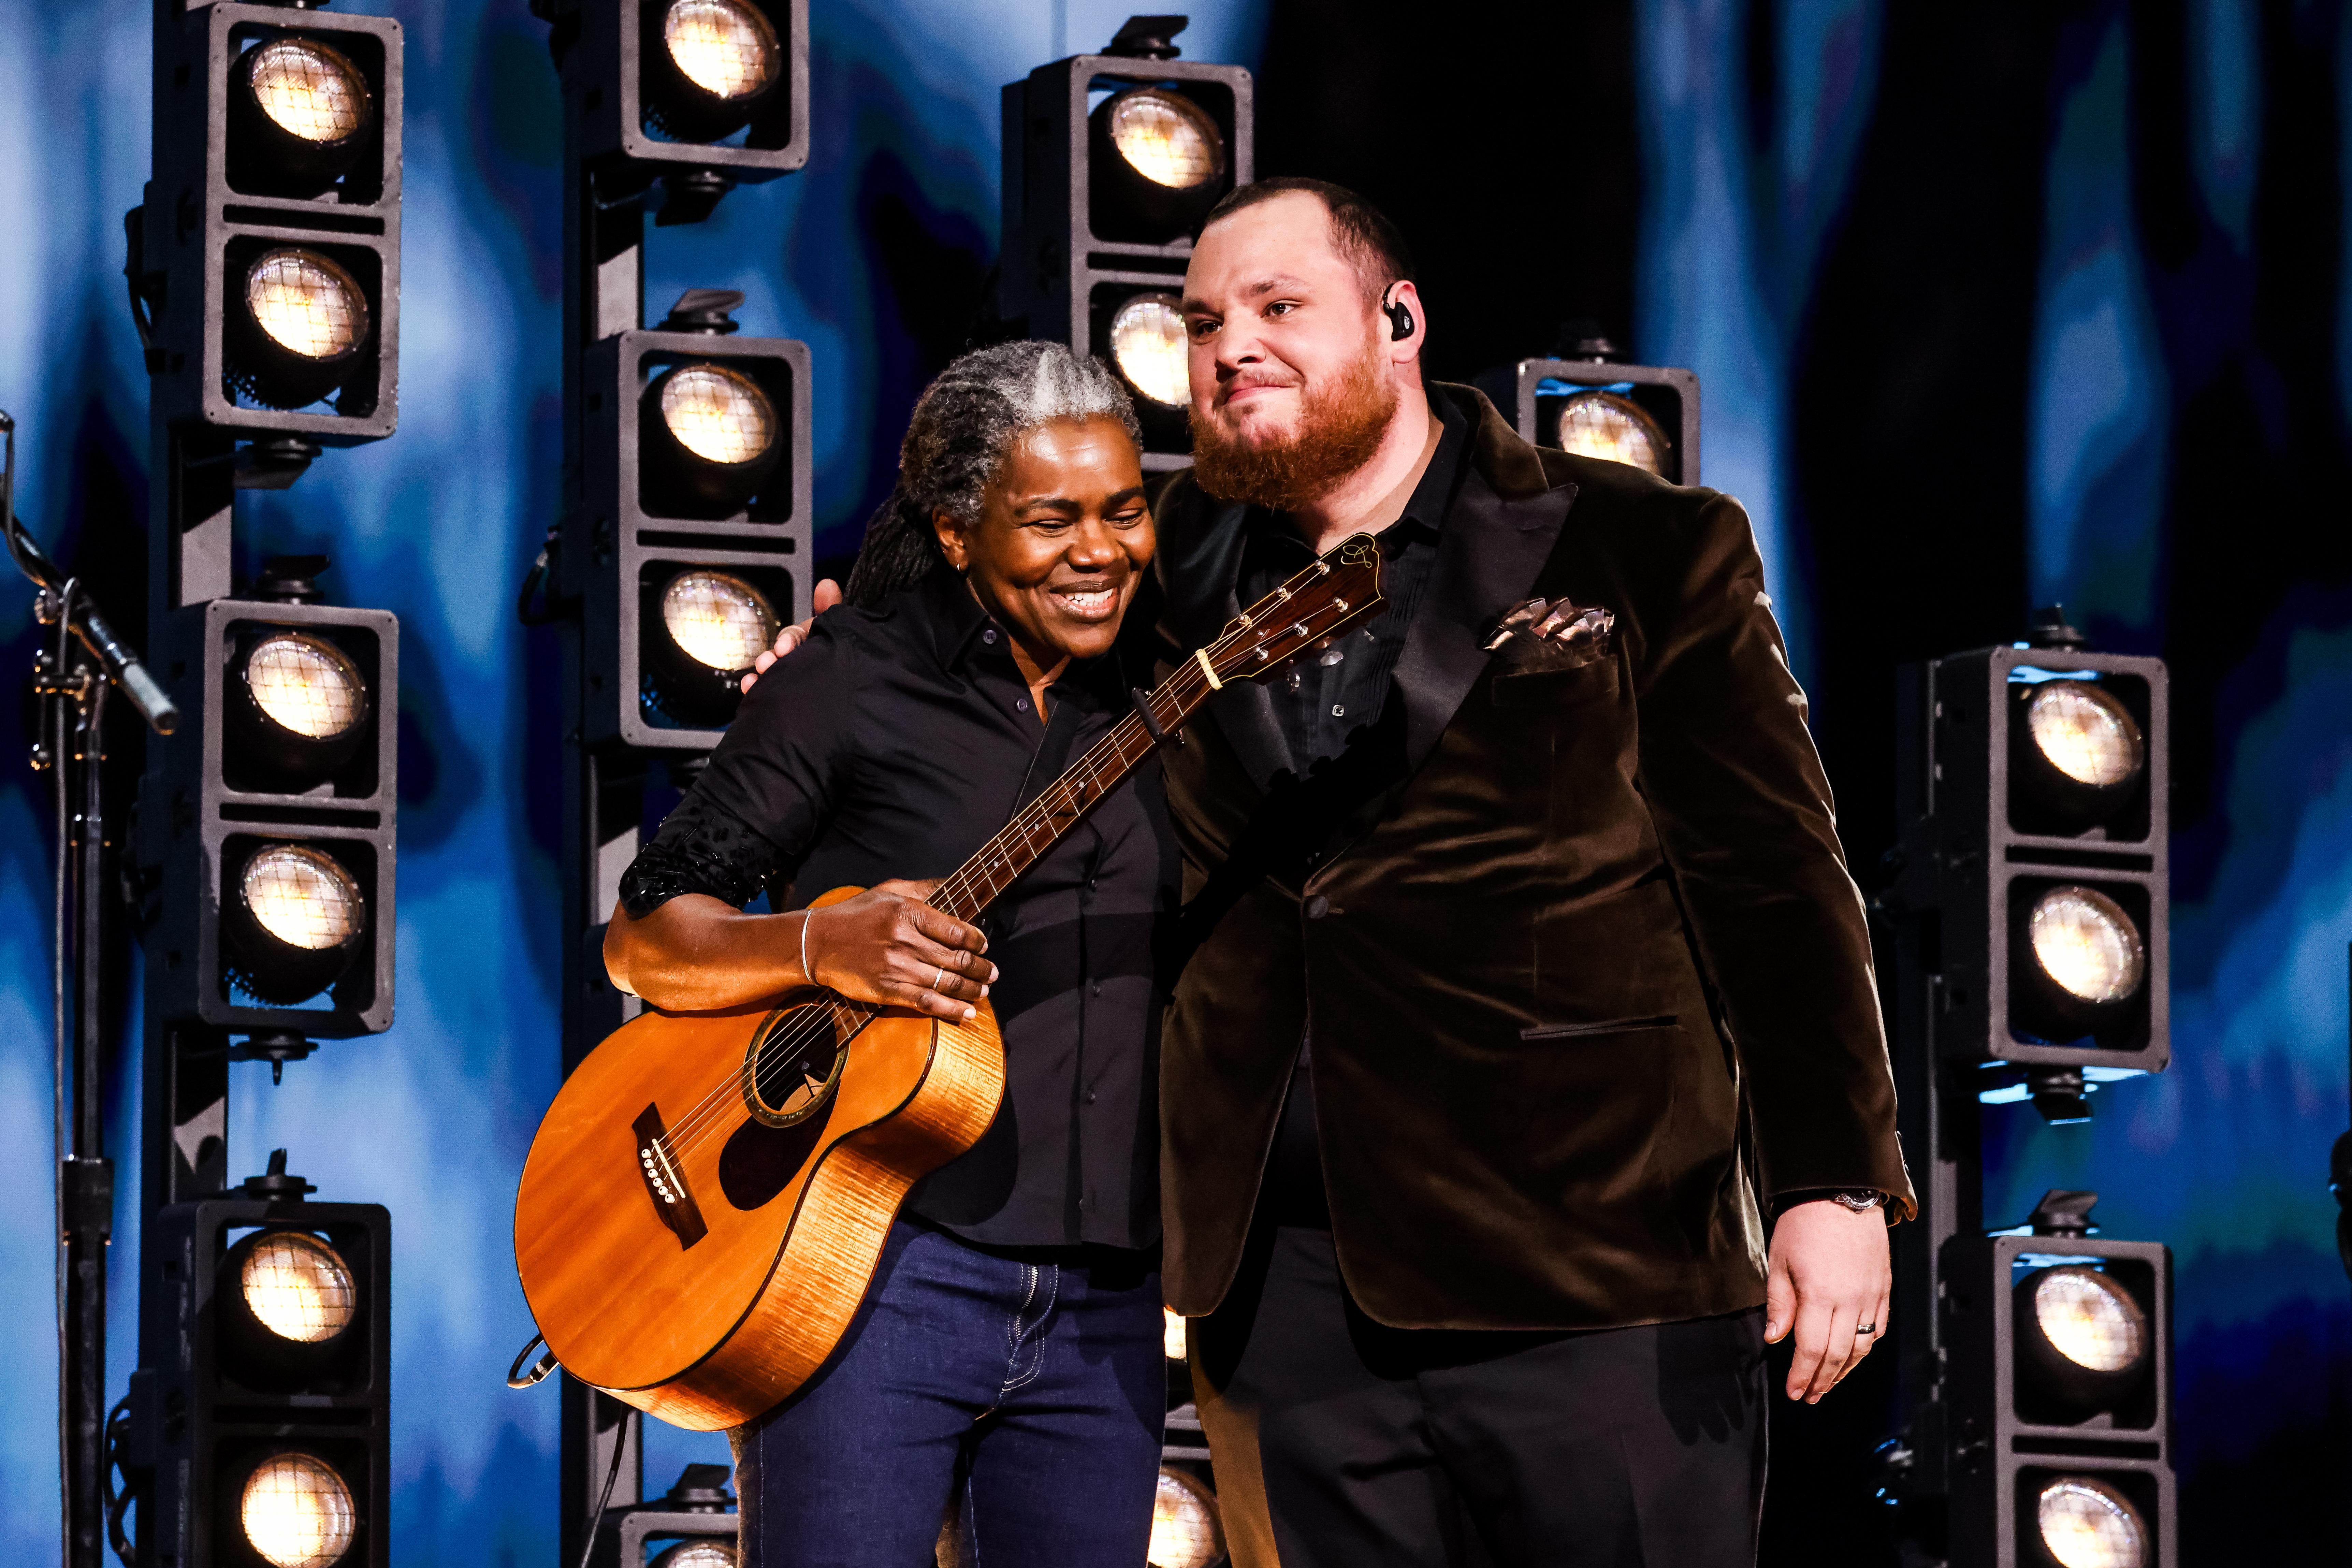 Tracy Chapman, holding a guitar, smiles and places her arm around Luke Combs, who looks on.